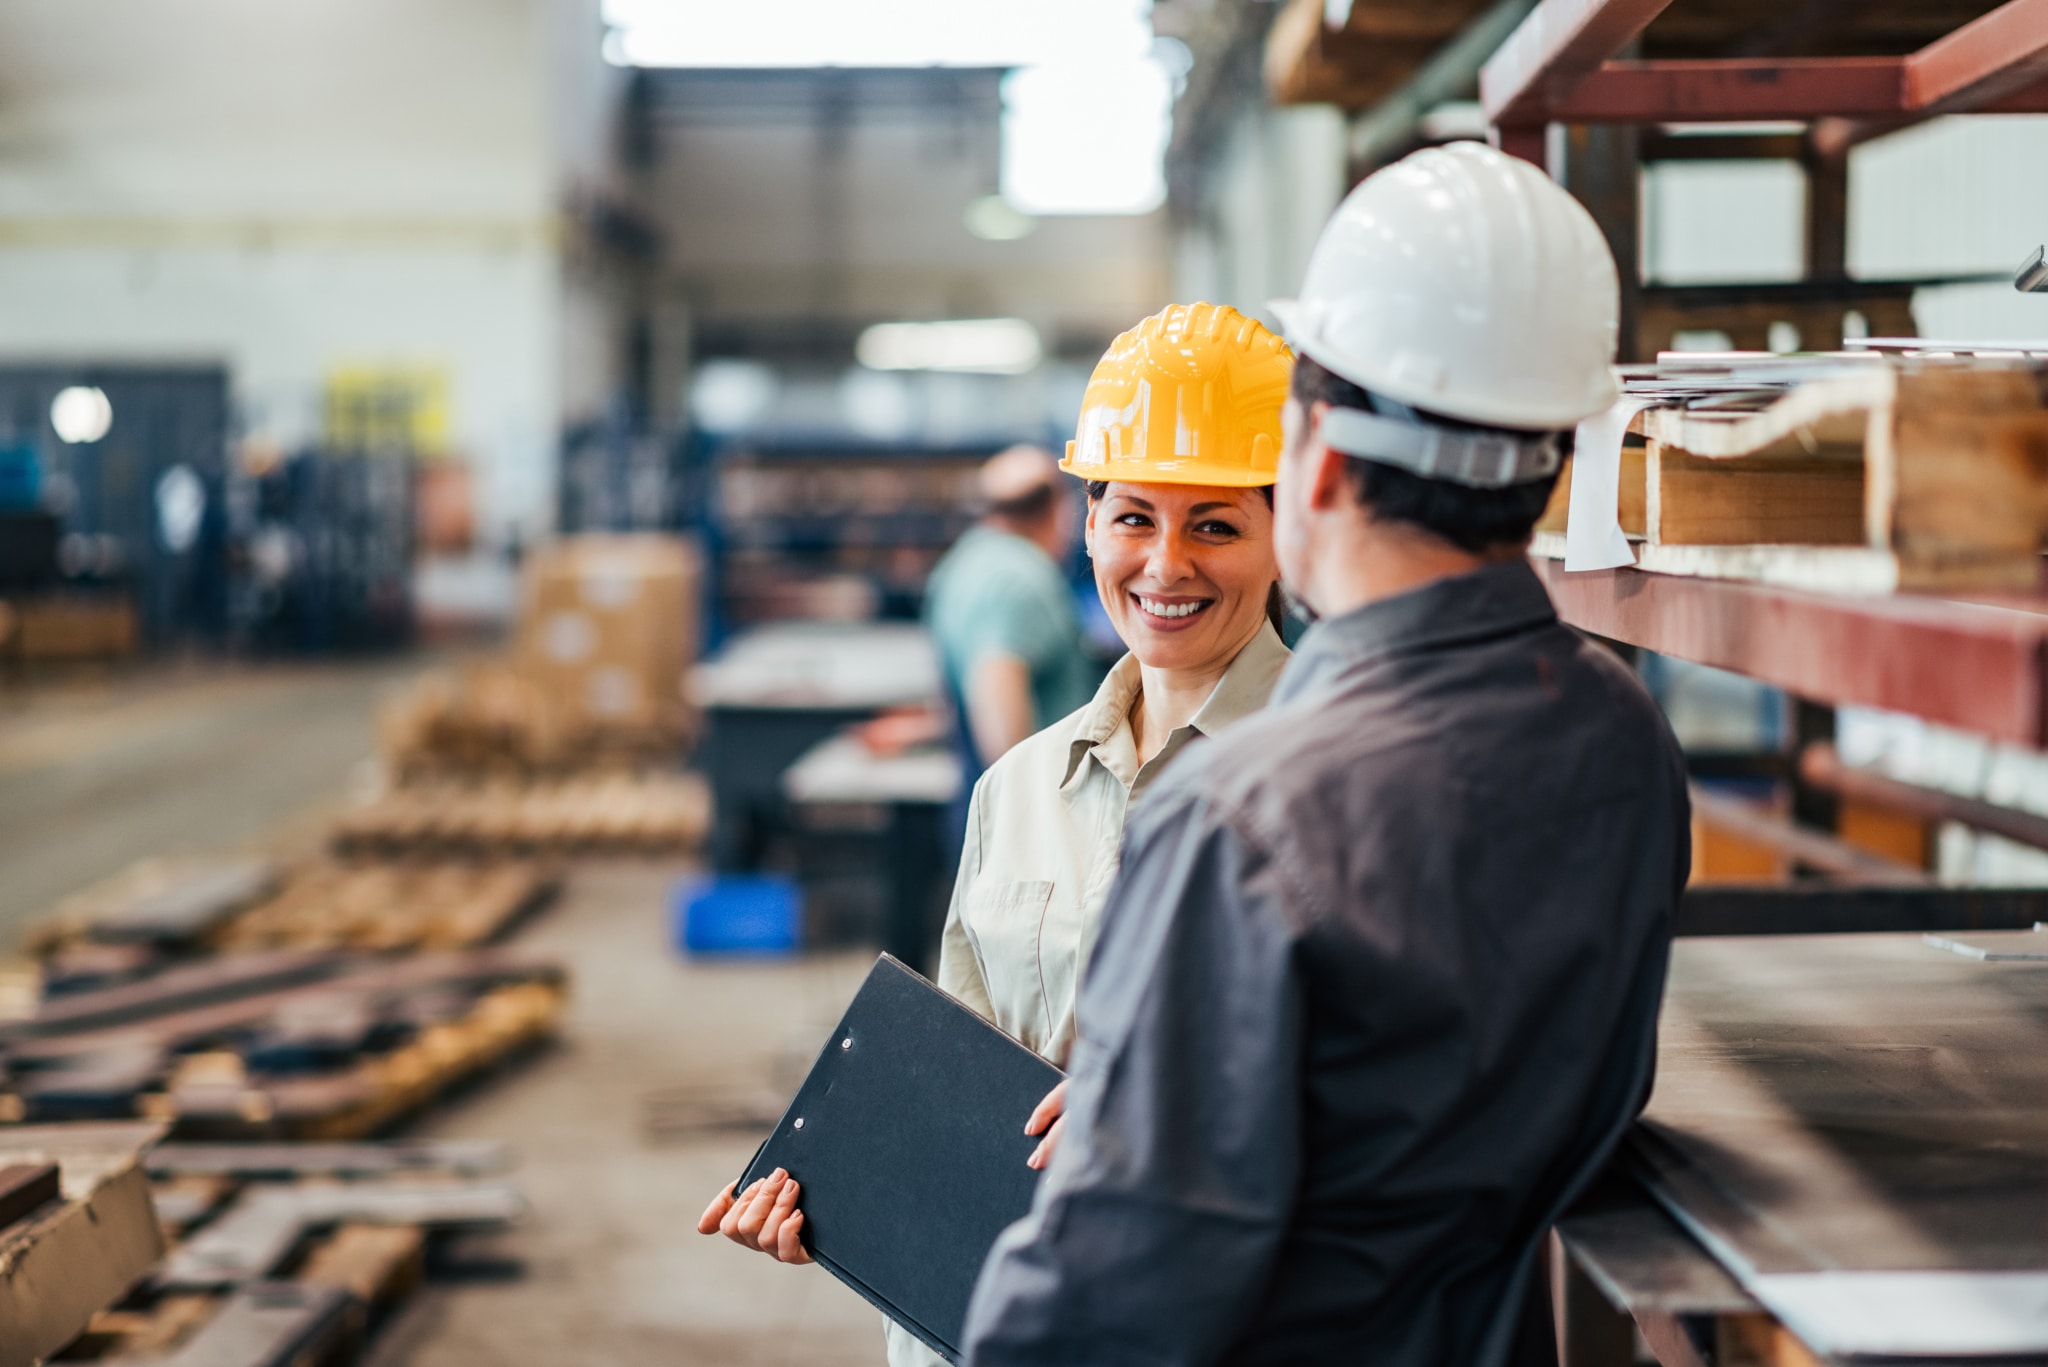 Two people wearing hard hats in a warehouse